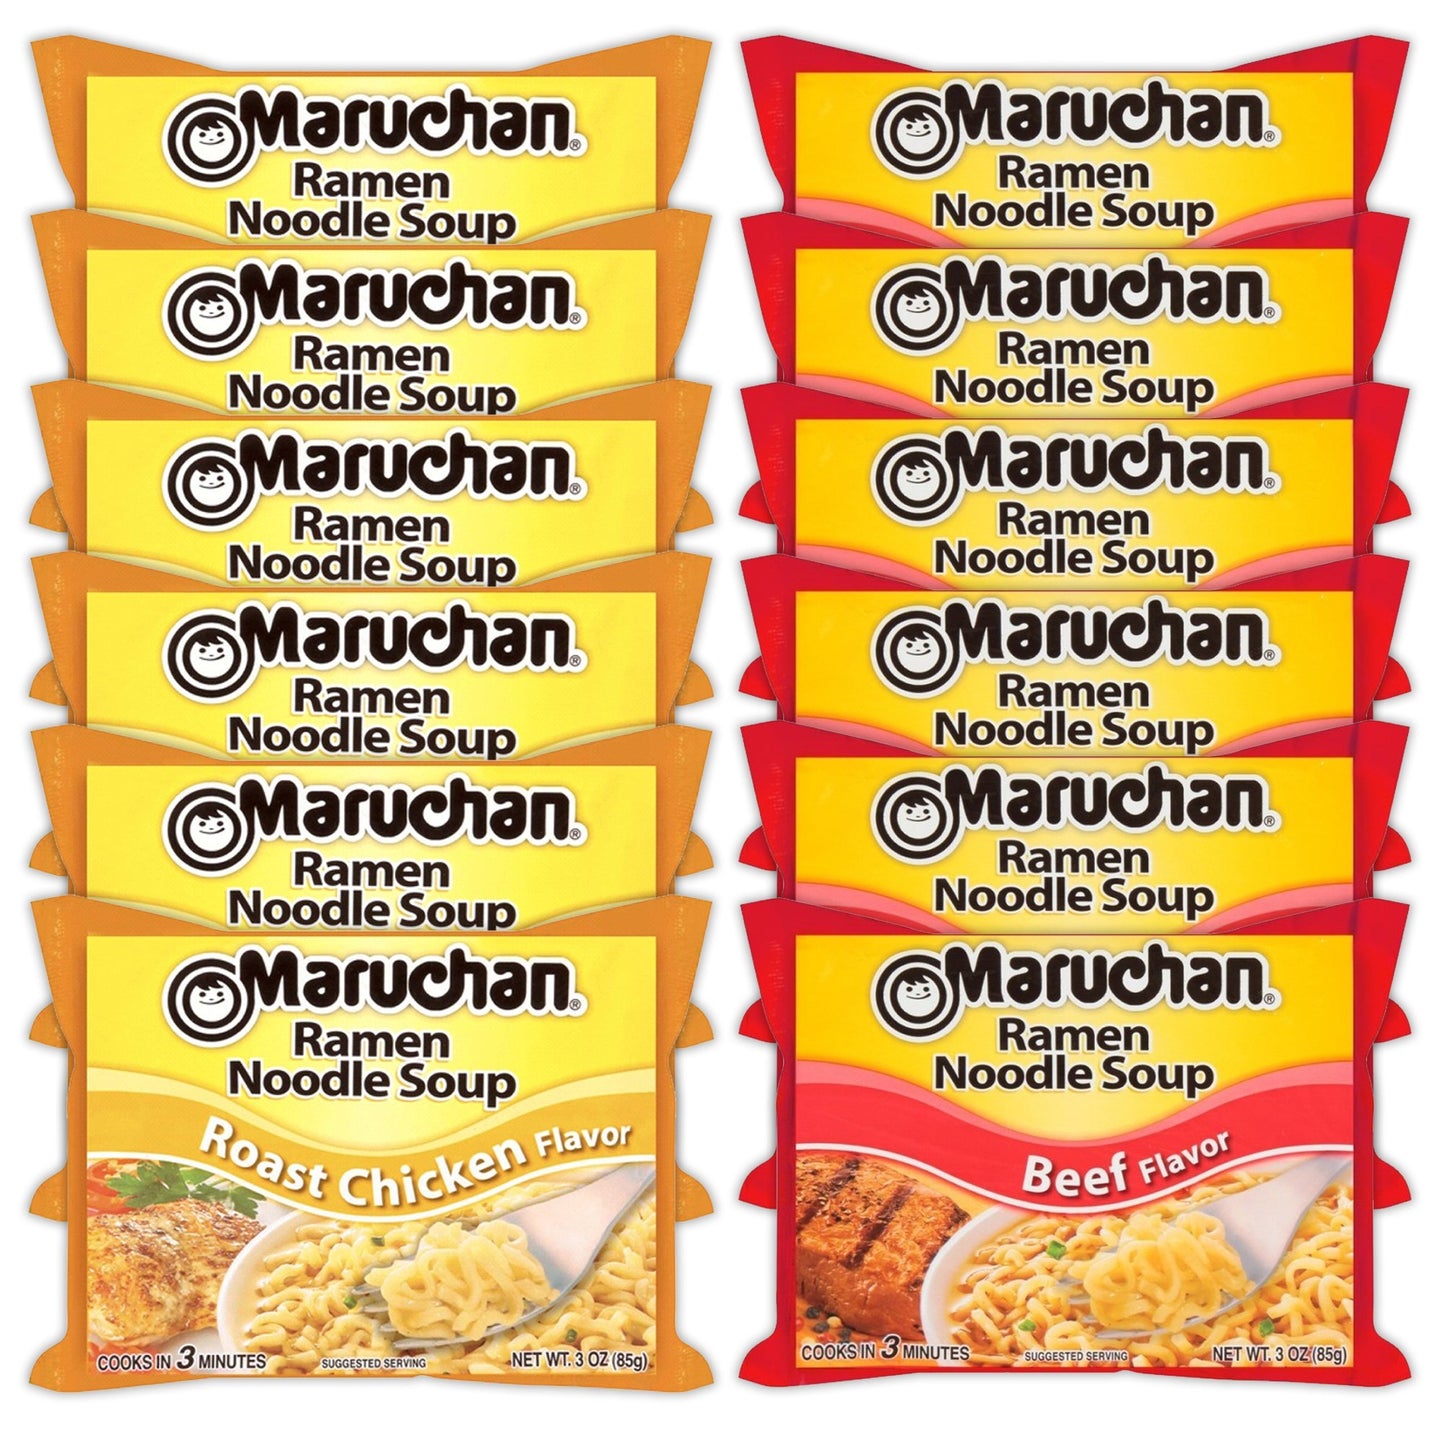 Maruchan Ramen Instant Noodle Soup Variety, 2 Flavors - 6 Packs Roast Chicken & 6 Packs Beef , 3 Ounce Single Servings Lunch / Dinner Variety